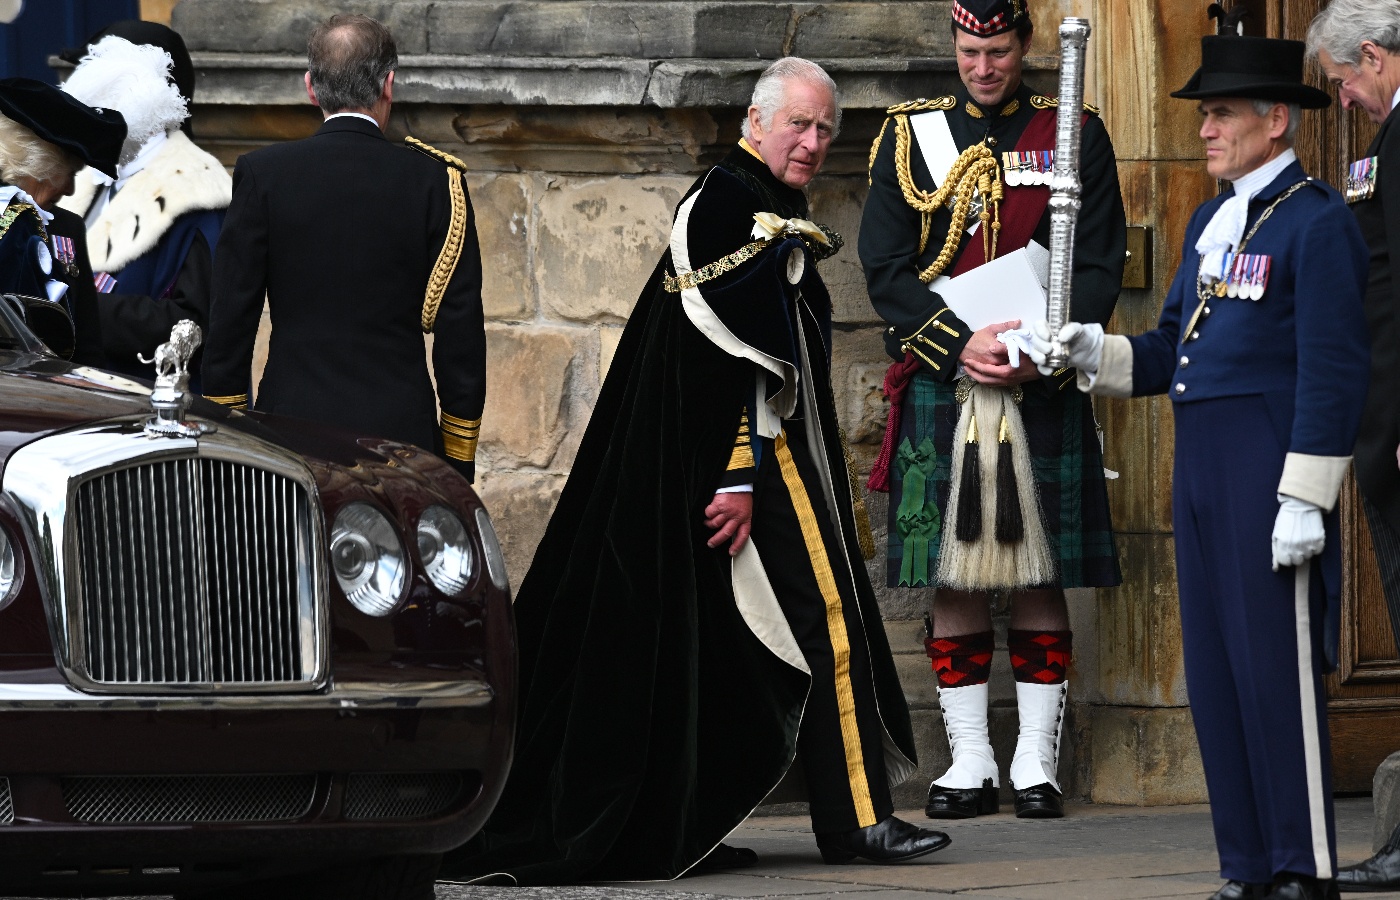 King Charles III returns to the Palace of Holyroodhouse for the national service of thanksgiving and dedication.